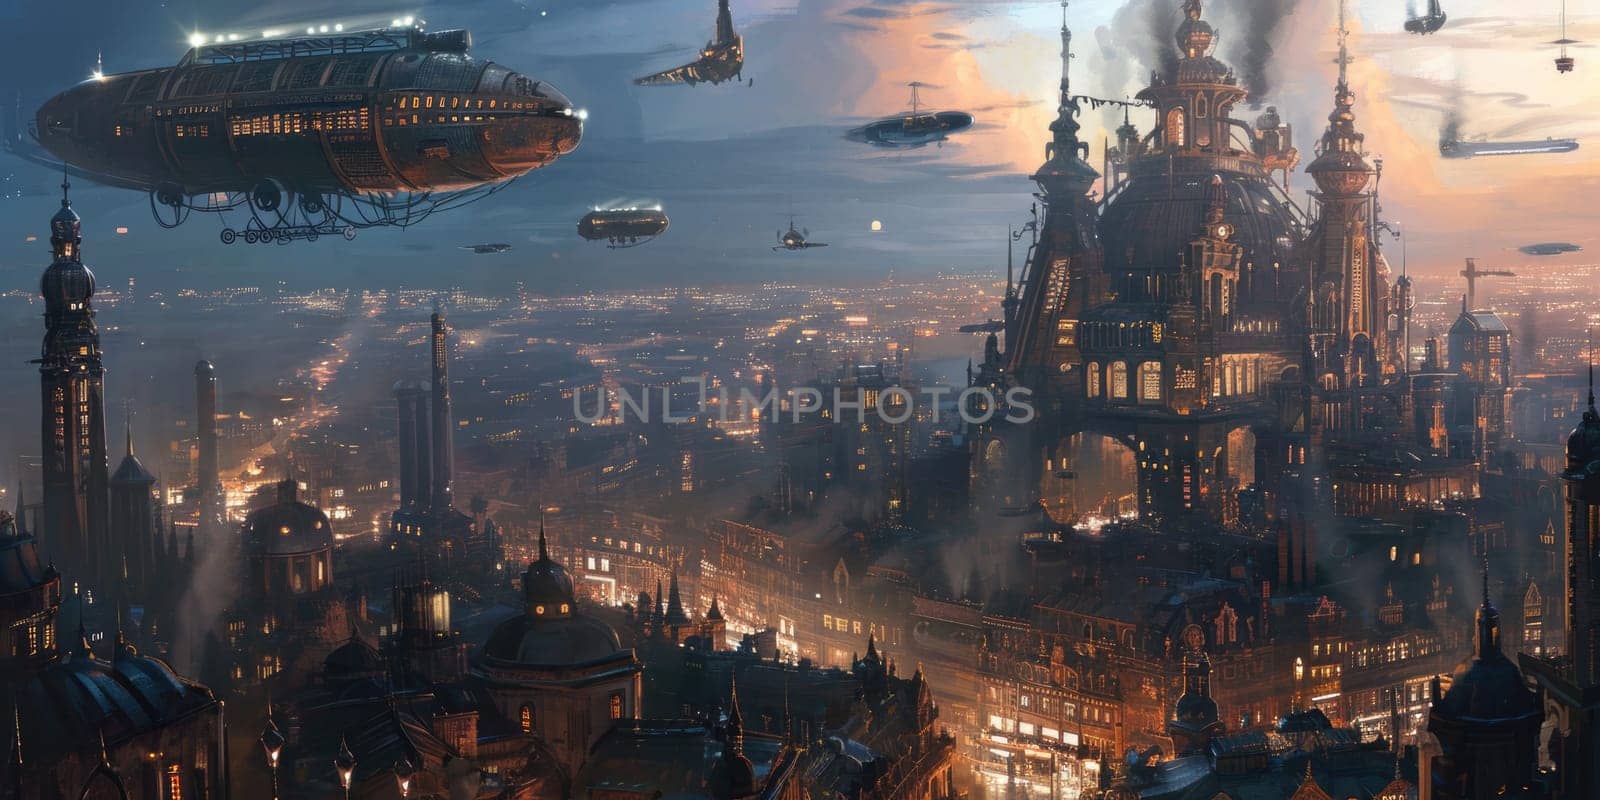 A fleet of steampunk airships hovers above a Victorian-inspired cityscape, enveloped in a golden mist at dawn. Resplendent.